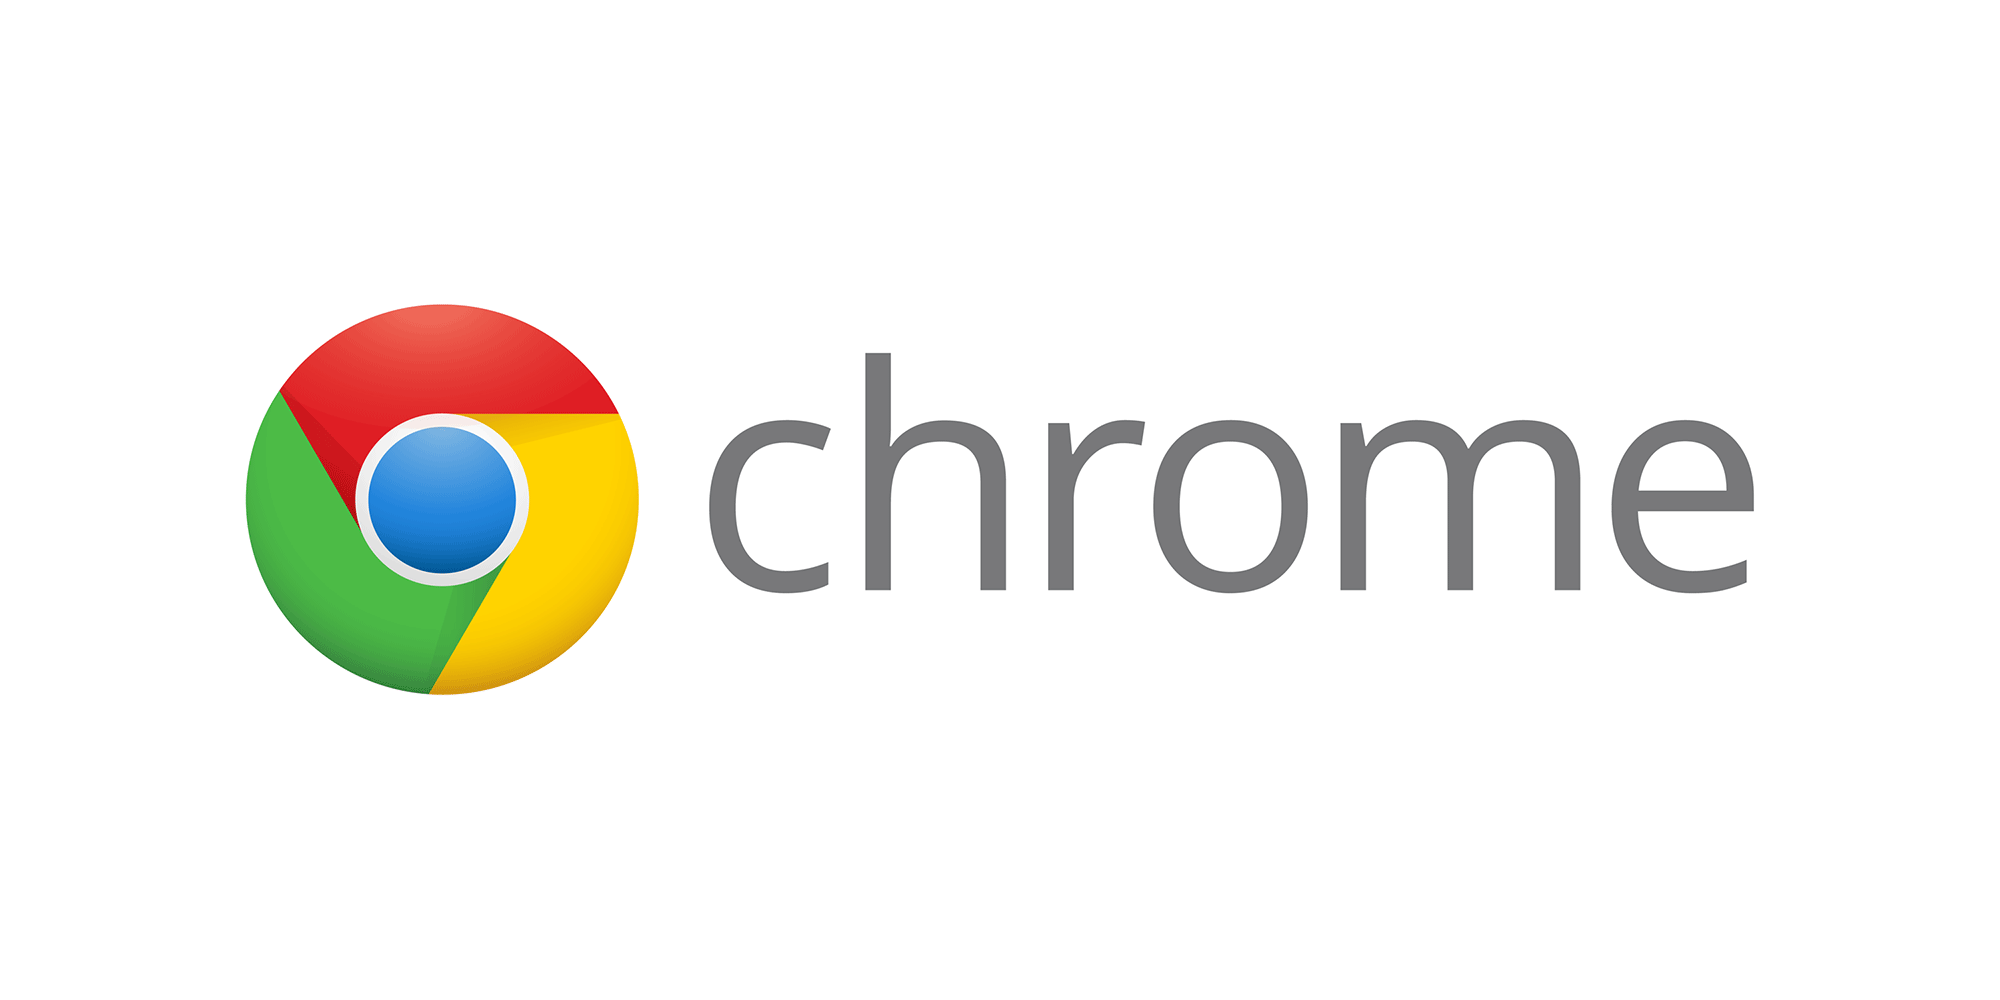 How to reopen closed tabs in Google Chrome